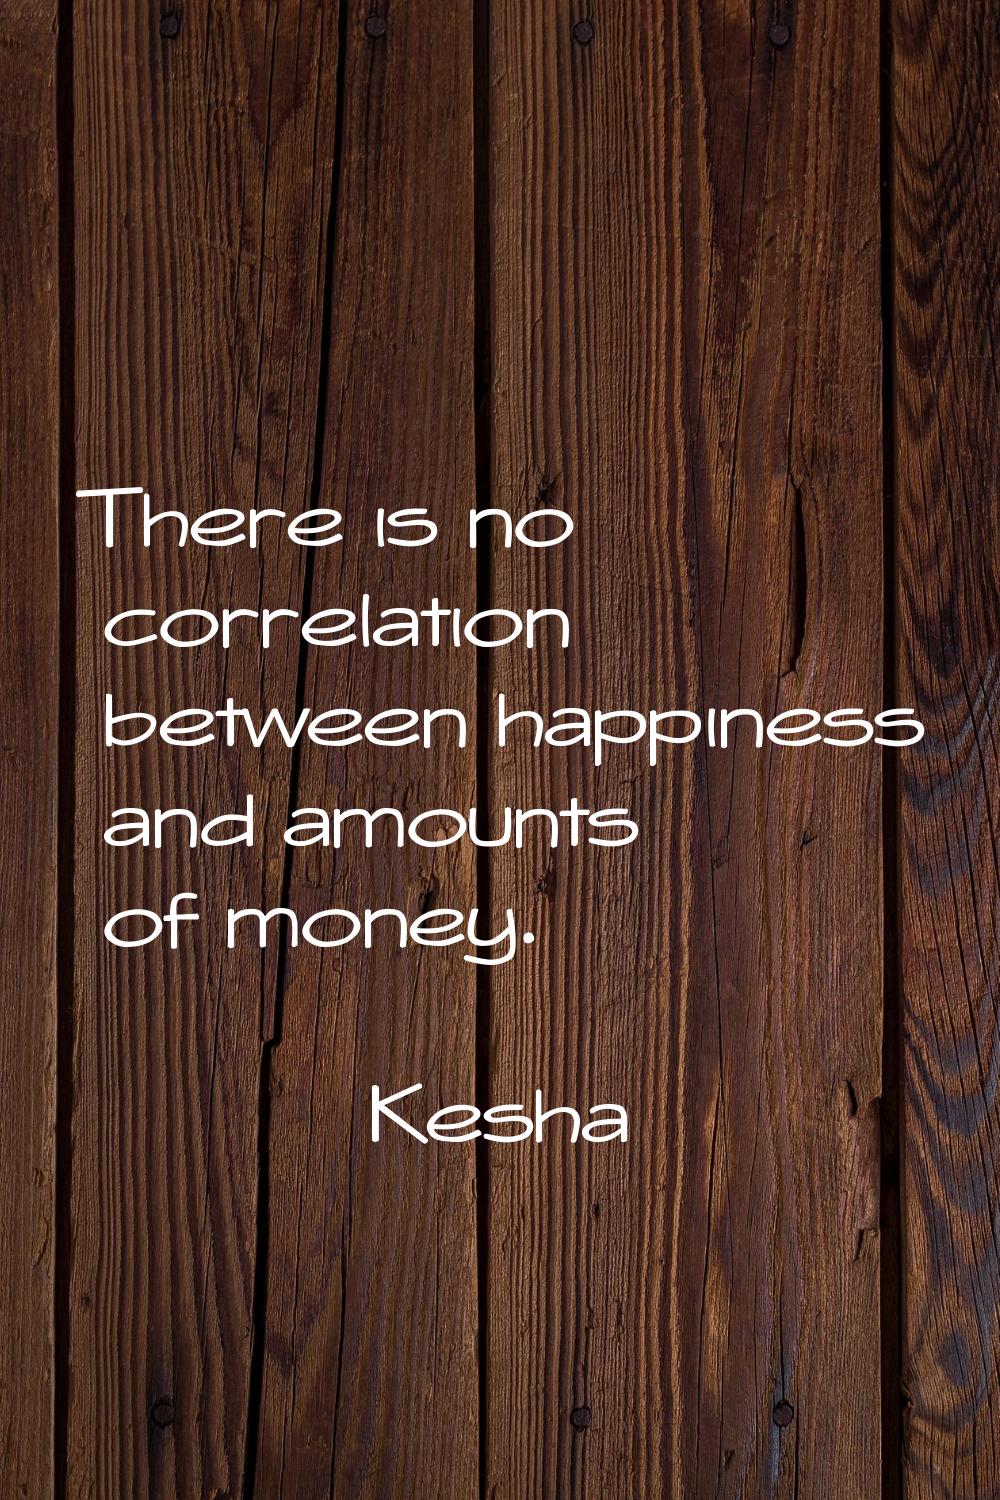 There is no correlation between happiness and amounts of money.